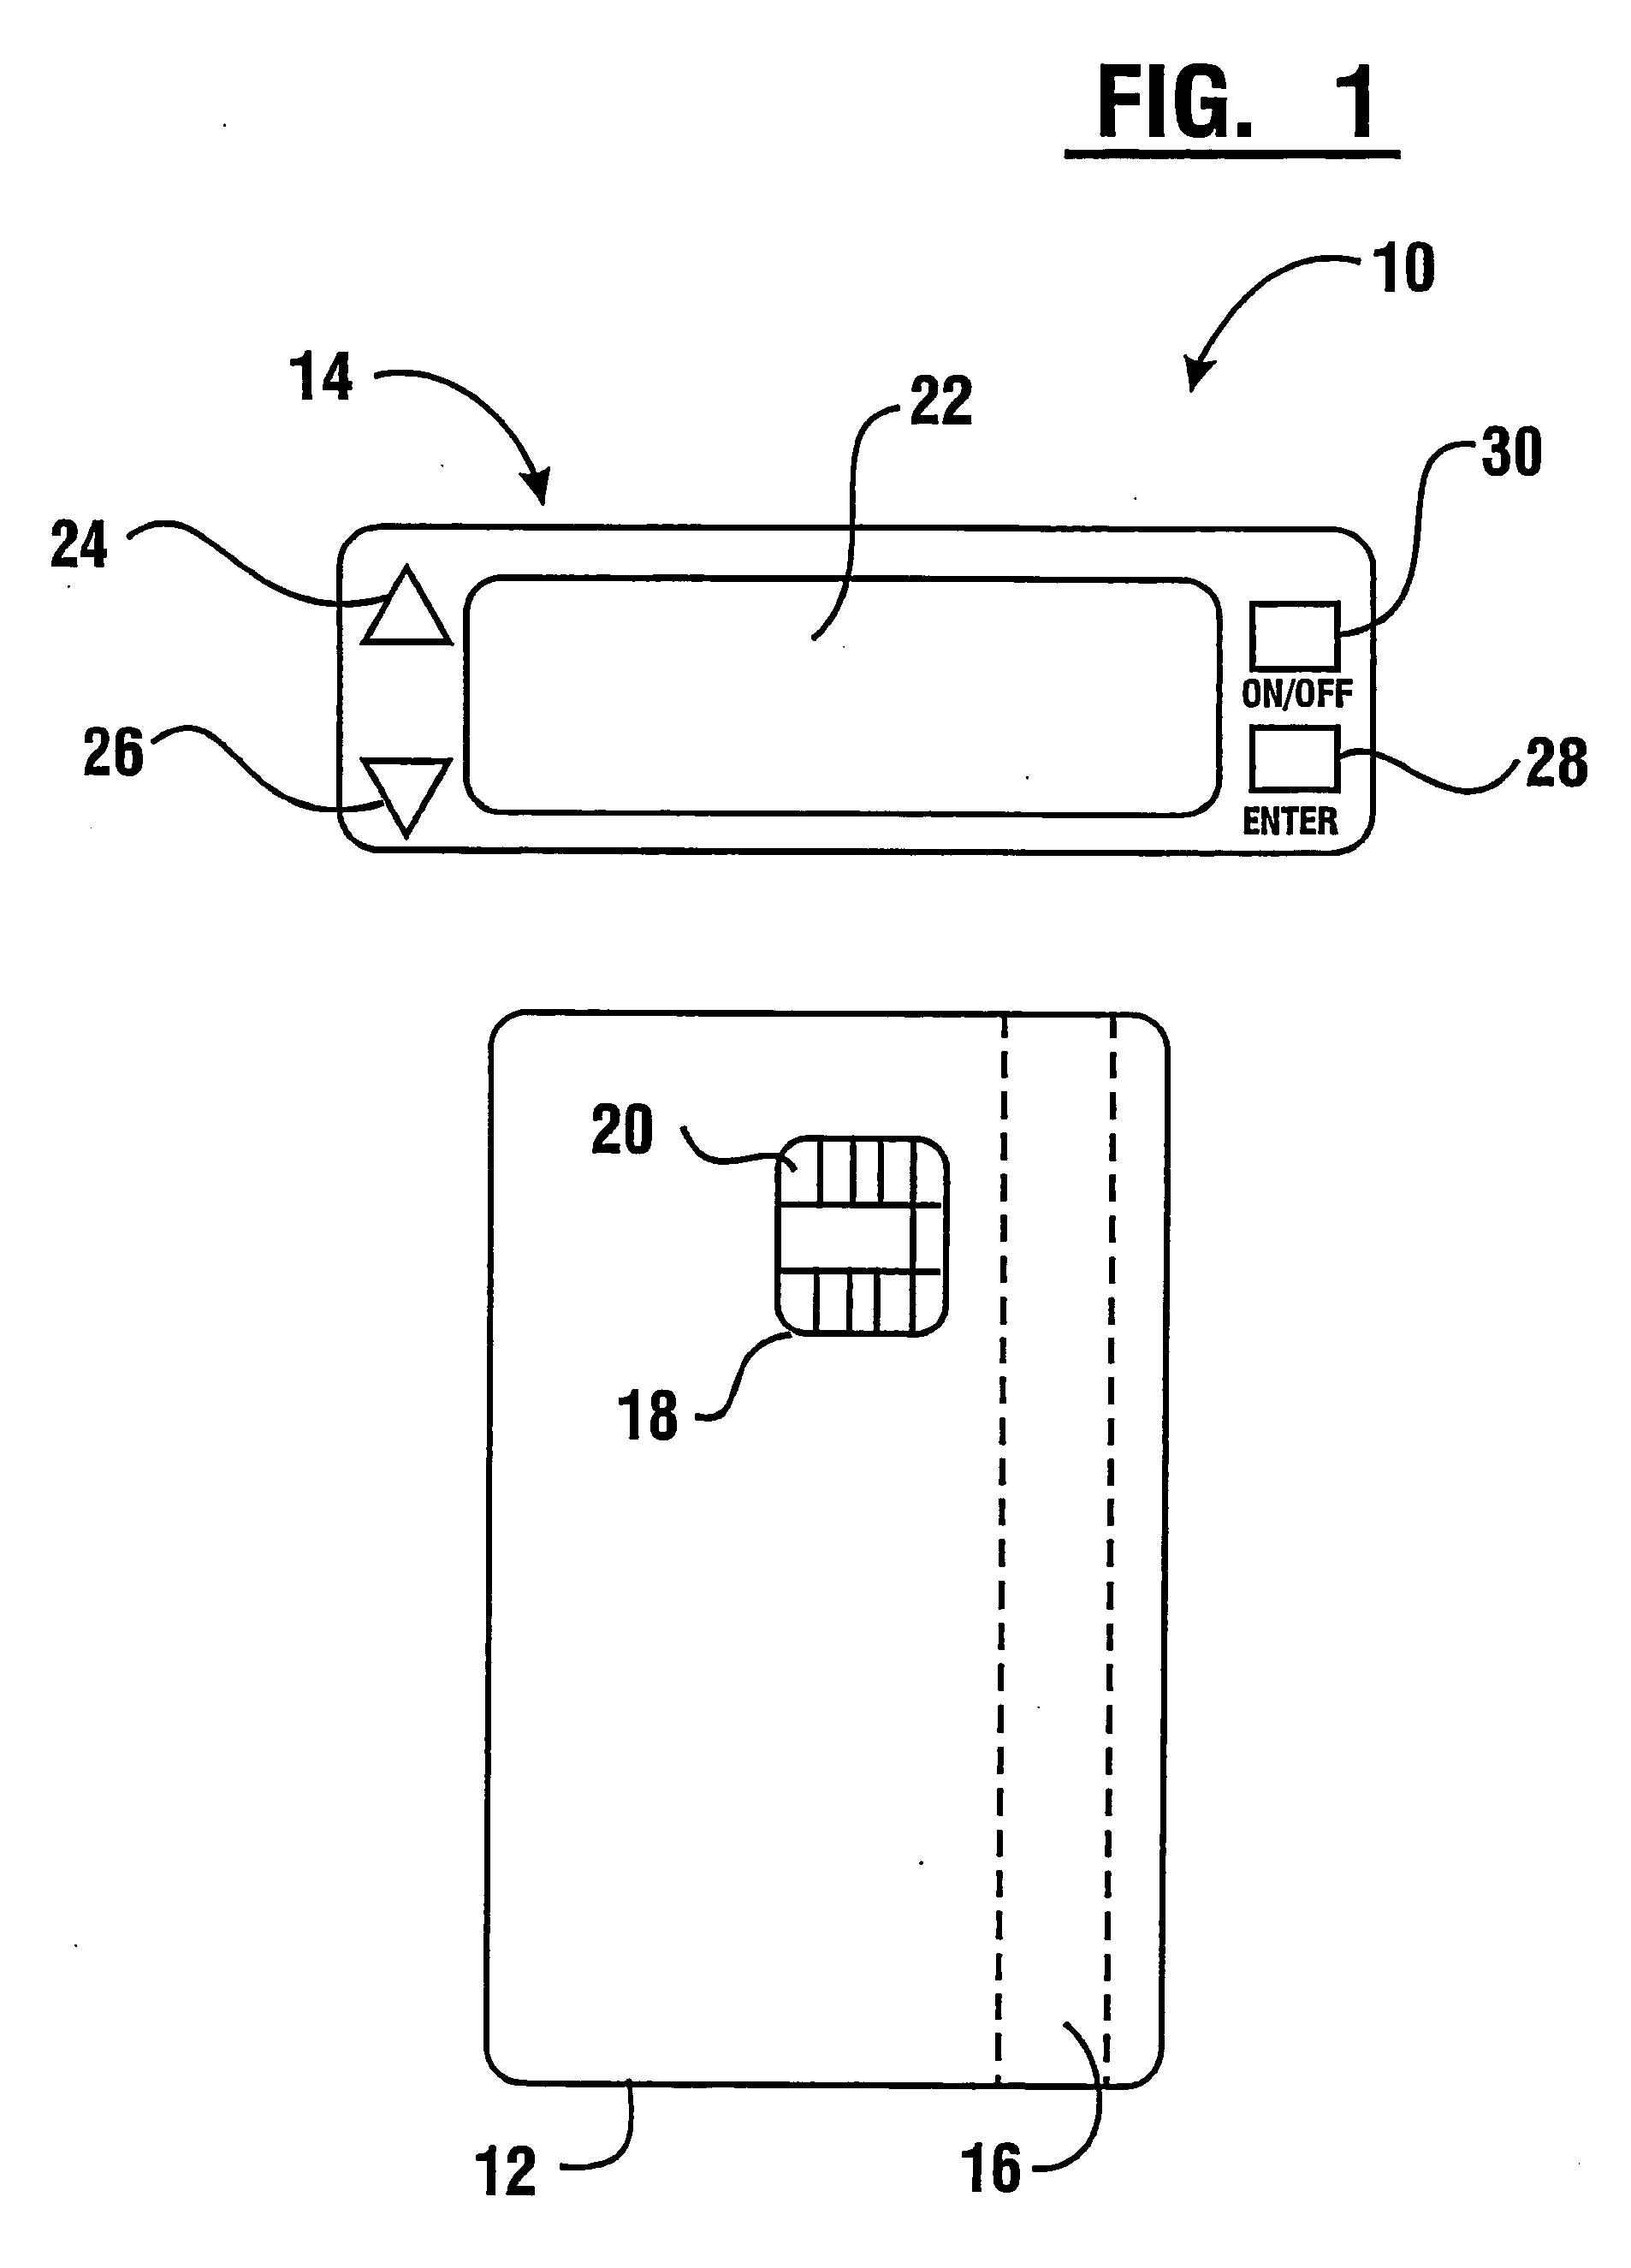 Cash dispensing automated banking machine with flexible display